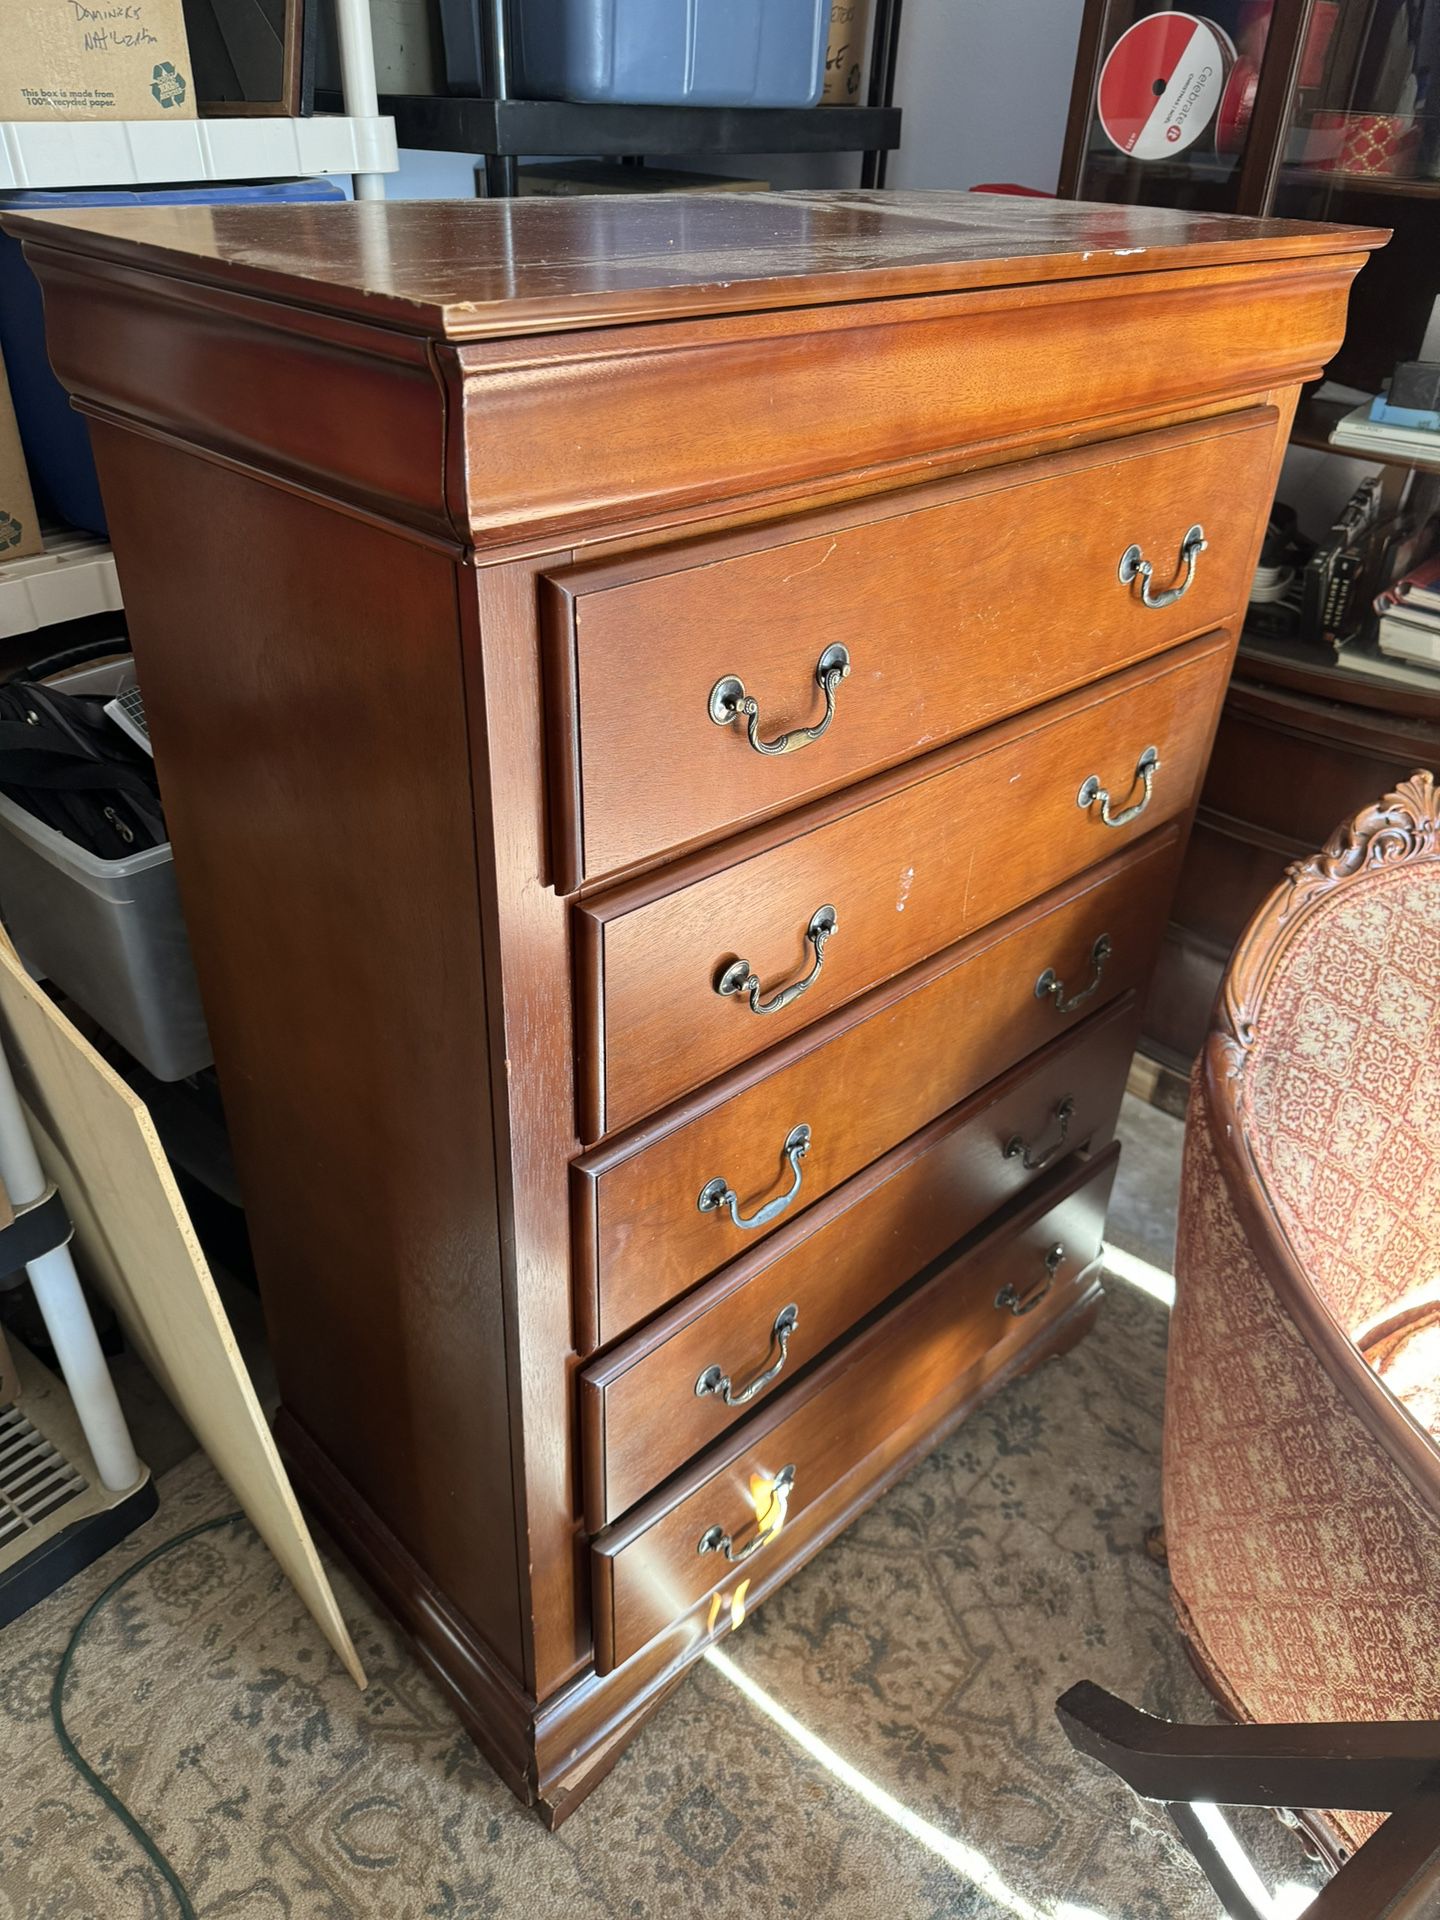 2 vintage chest of drawers and a nightstand in need of some TLC